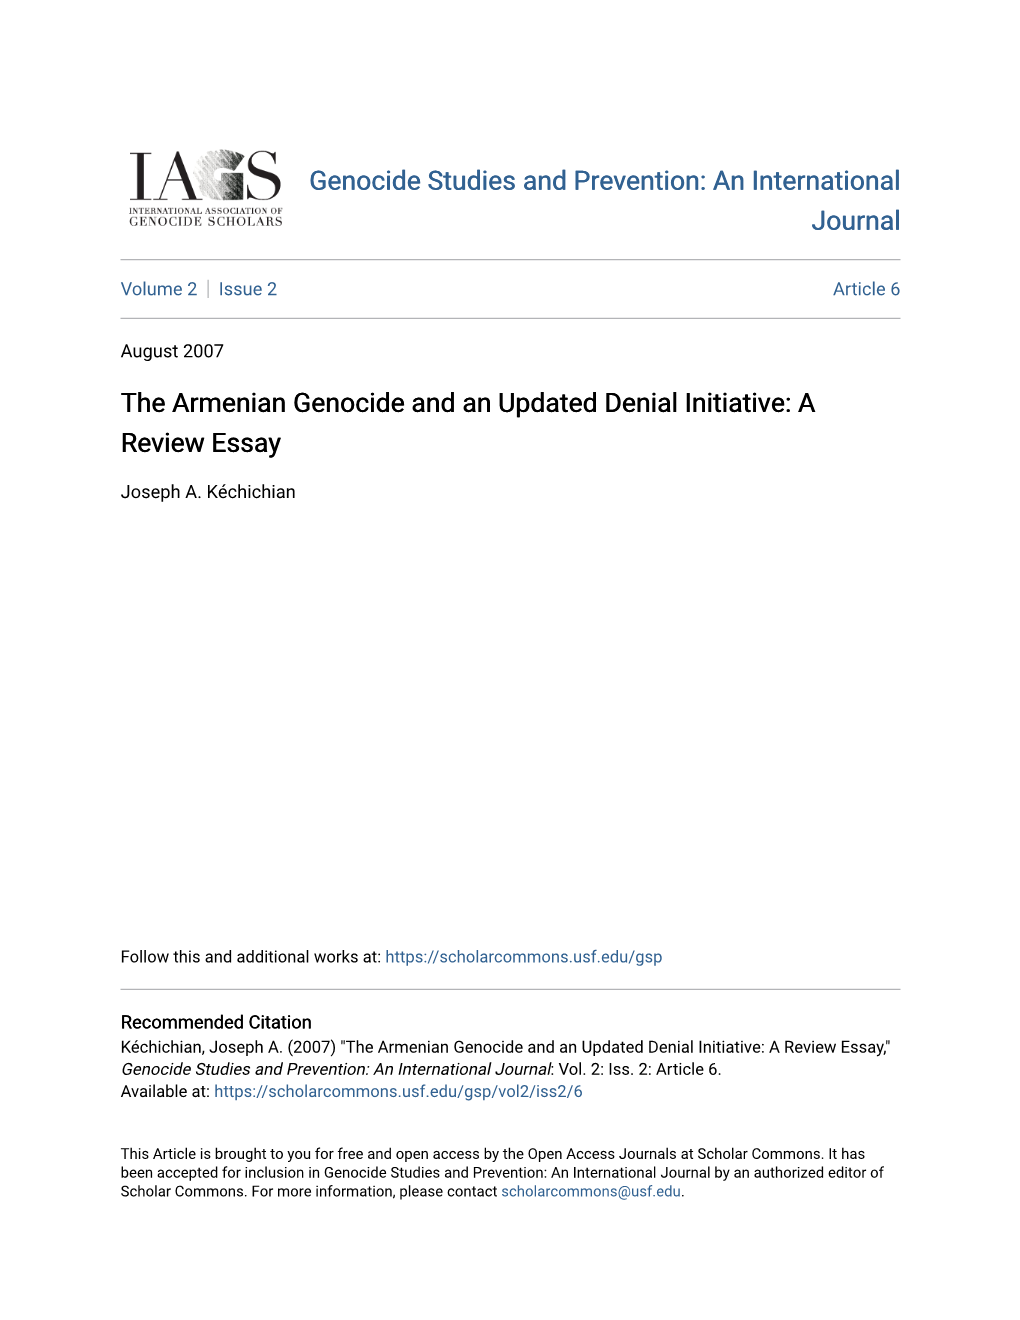 The Armenian Genocide and an Updated Denial Initiative: a Review Essay